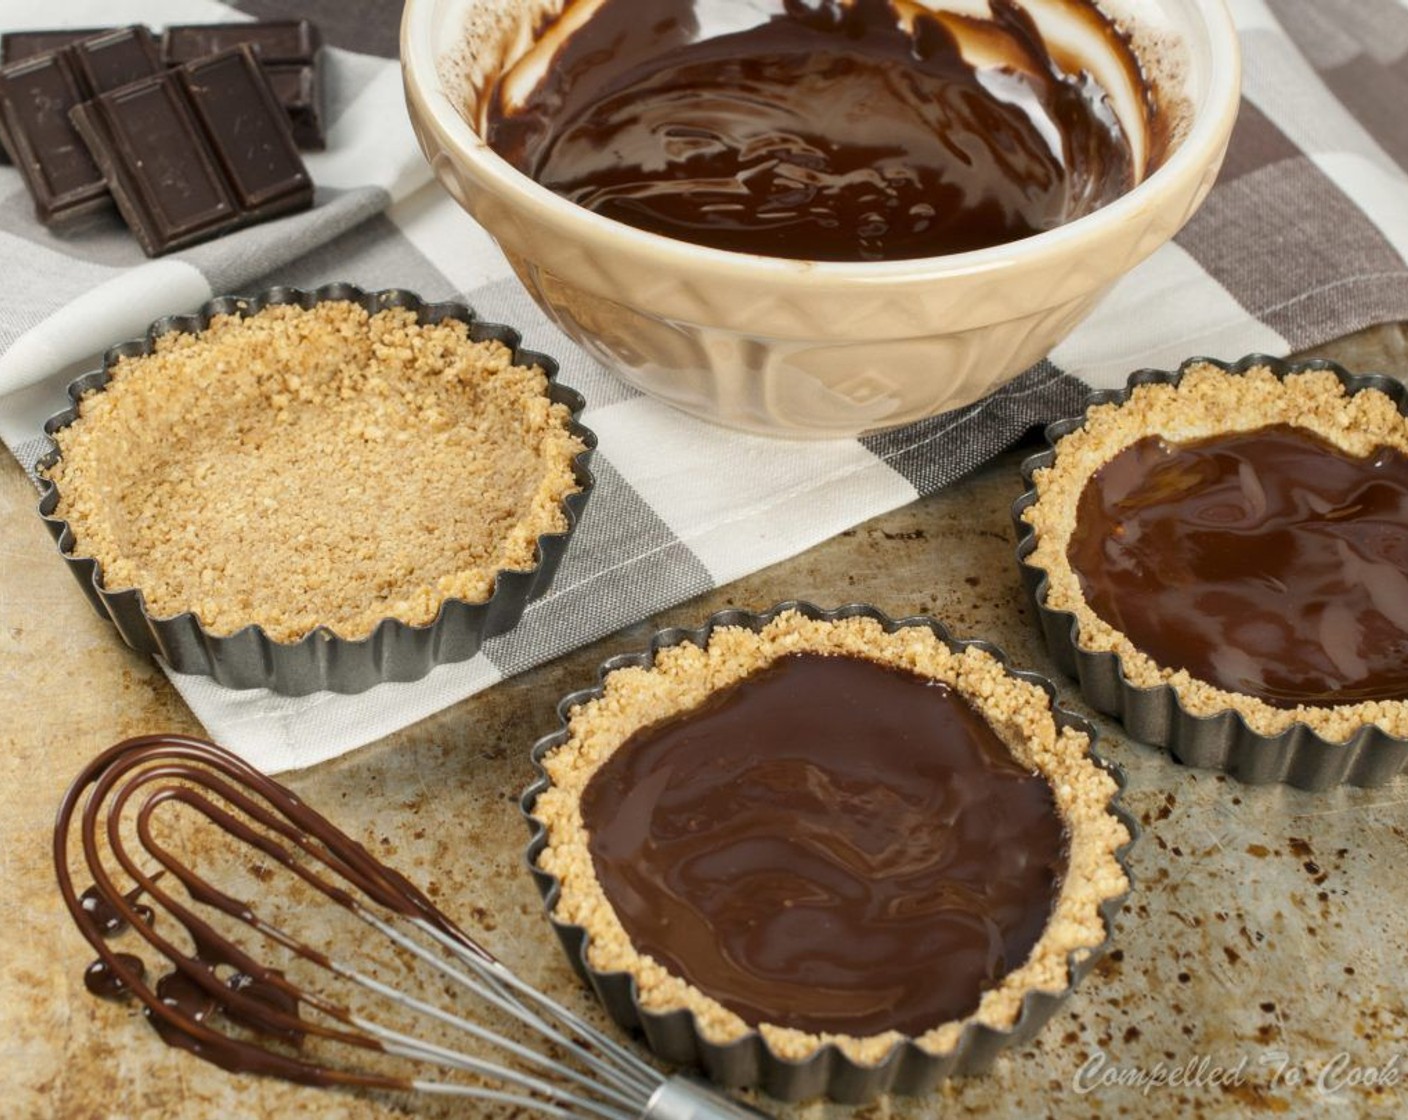 step 8 Scoop 1 tablespoon of ganache into cooled tart shells and spread out evenly over the bottom. Reserve remaining ganache for drizzling. Refrigerate tart shells for 15-20 minutes to firm up ganache.